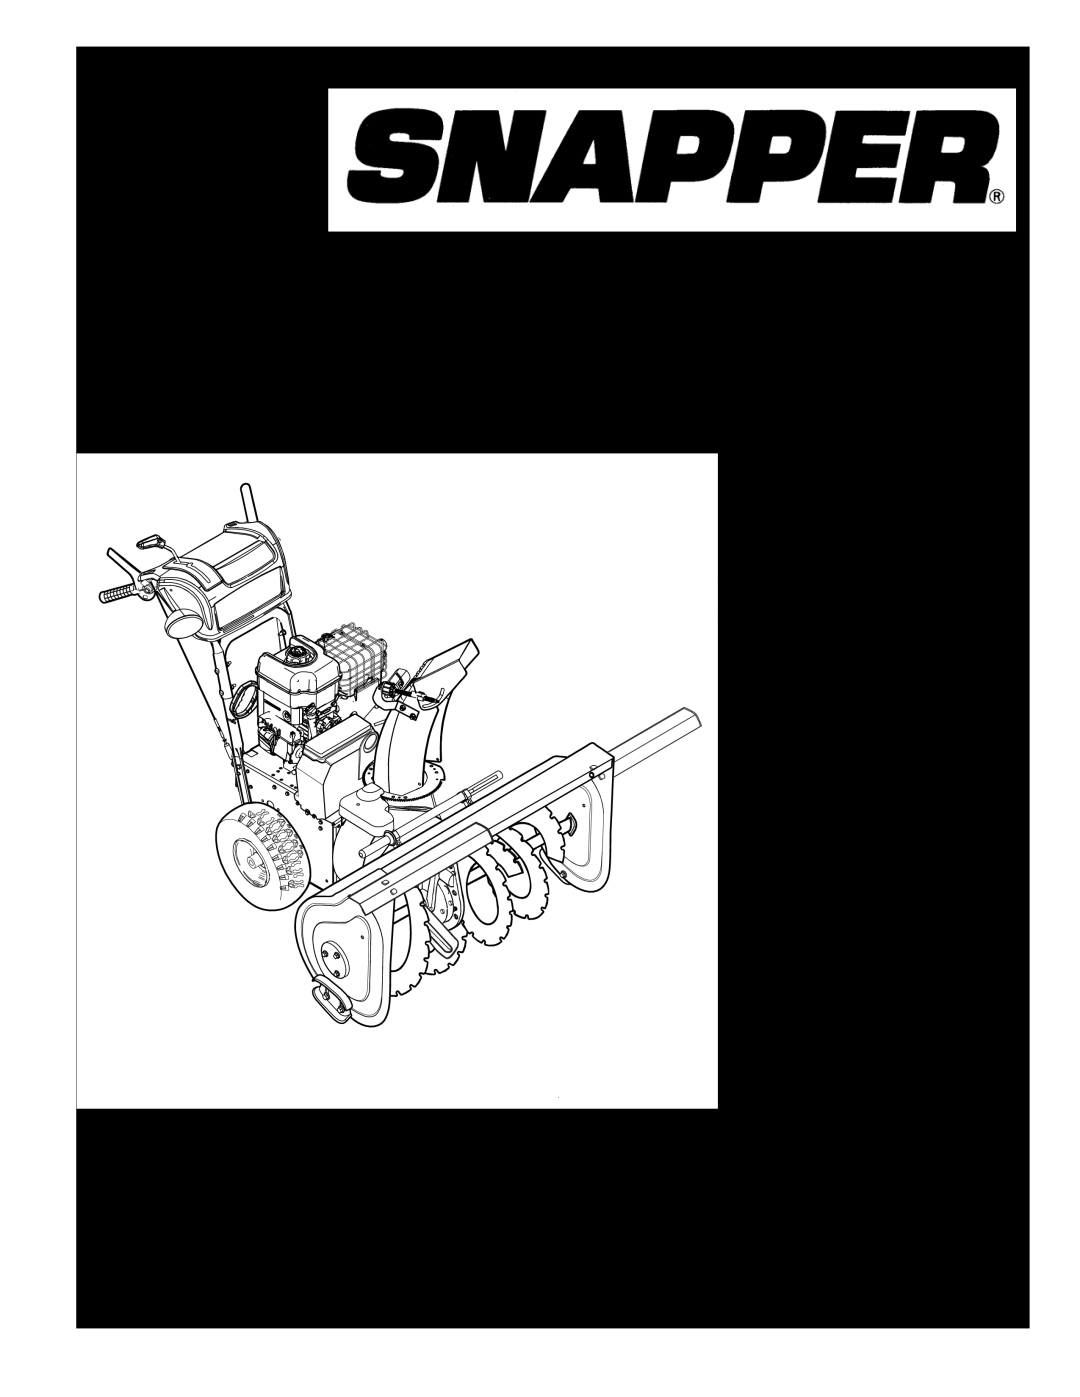 Snapper manual NotReporfroduction1696012, 26, 28 & 30 TWO STAGE LARGE FRAME SNOWTHROWERS, Parts Manual for, Manual No 